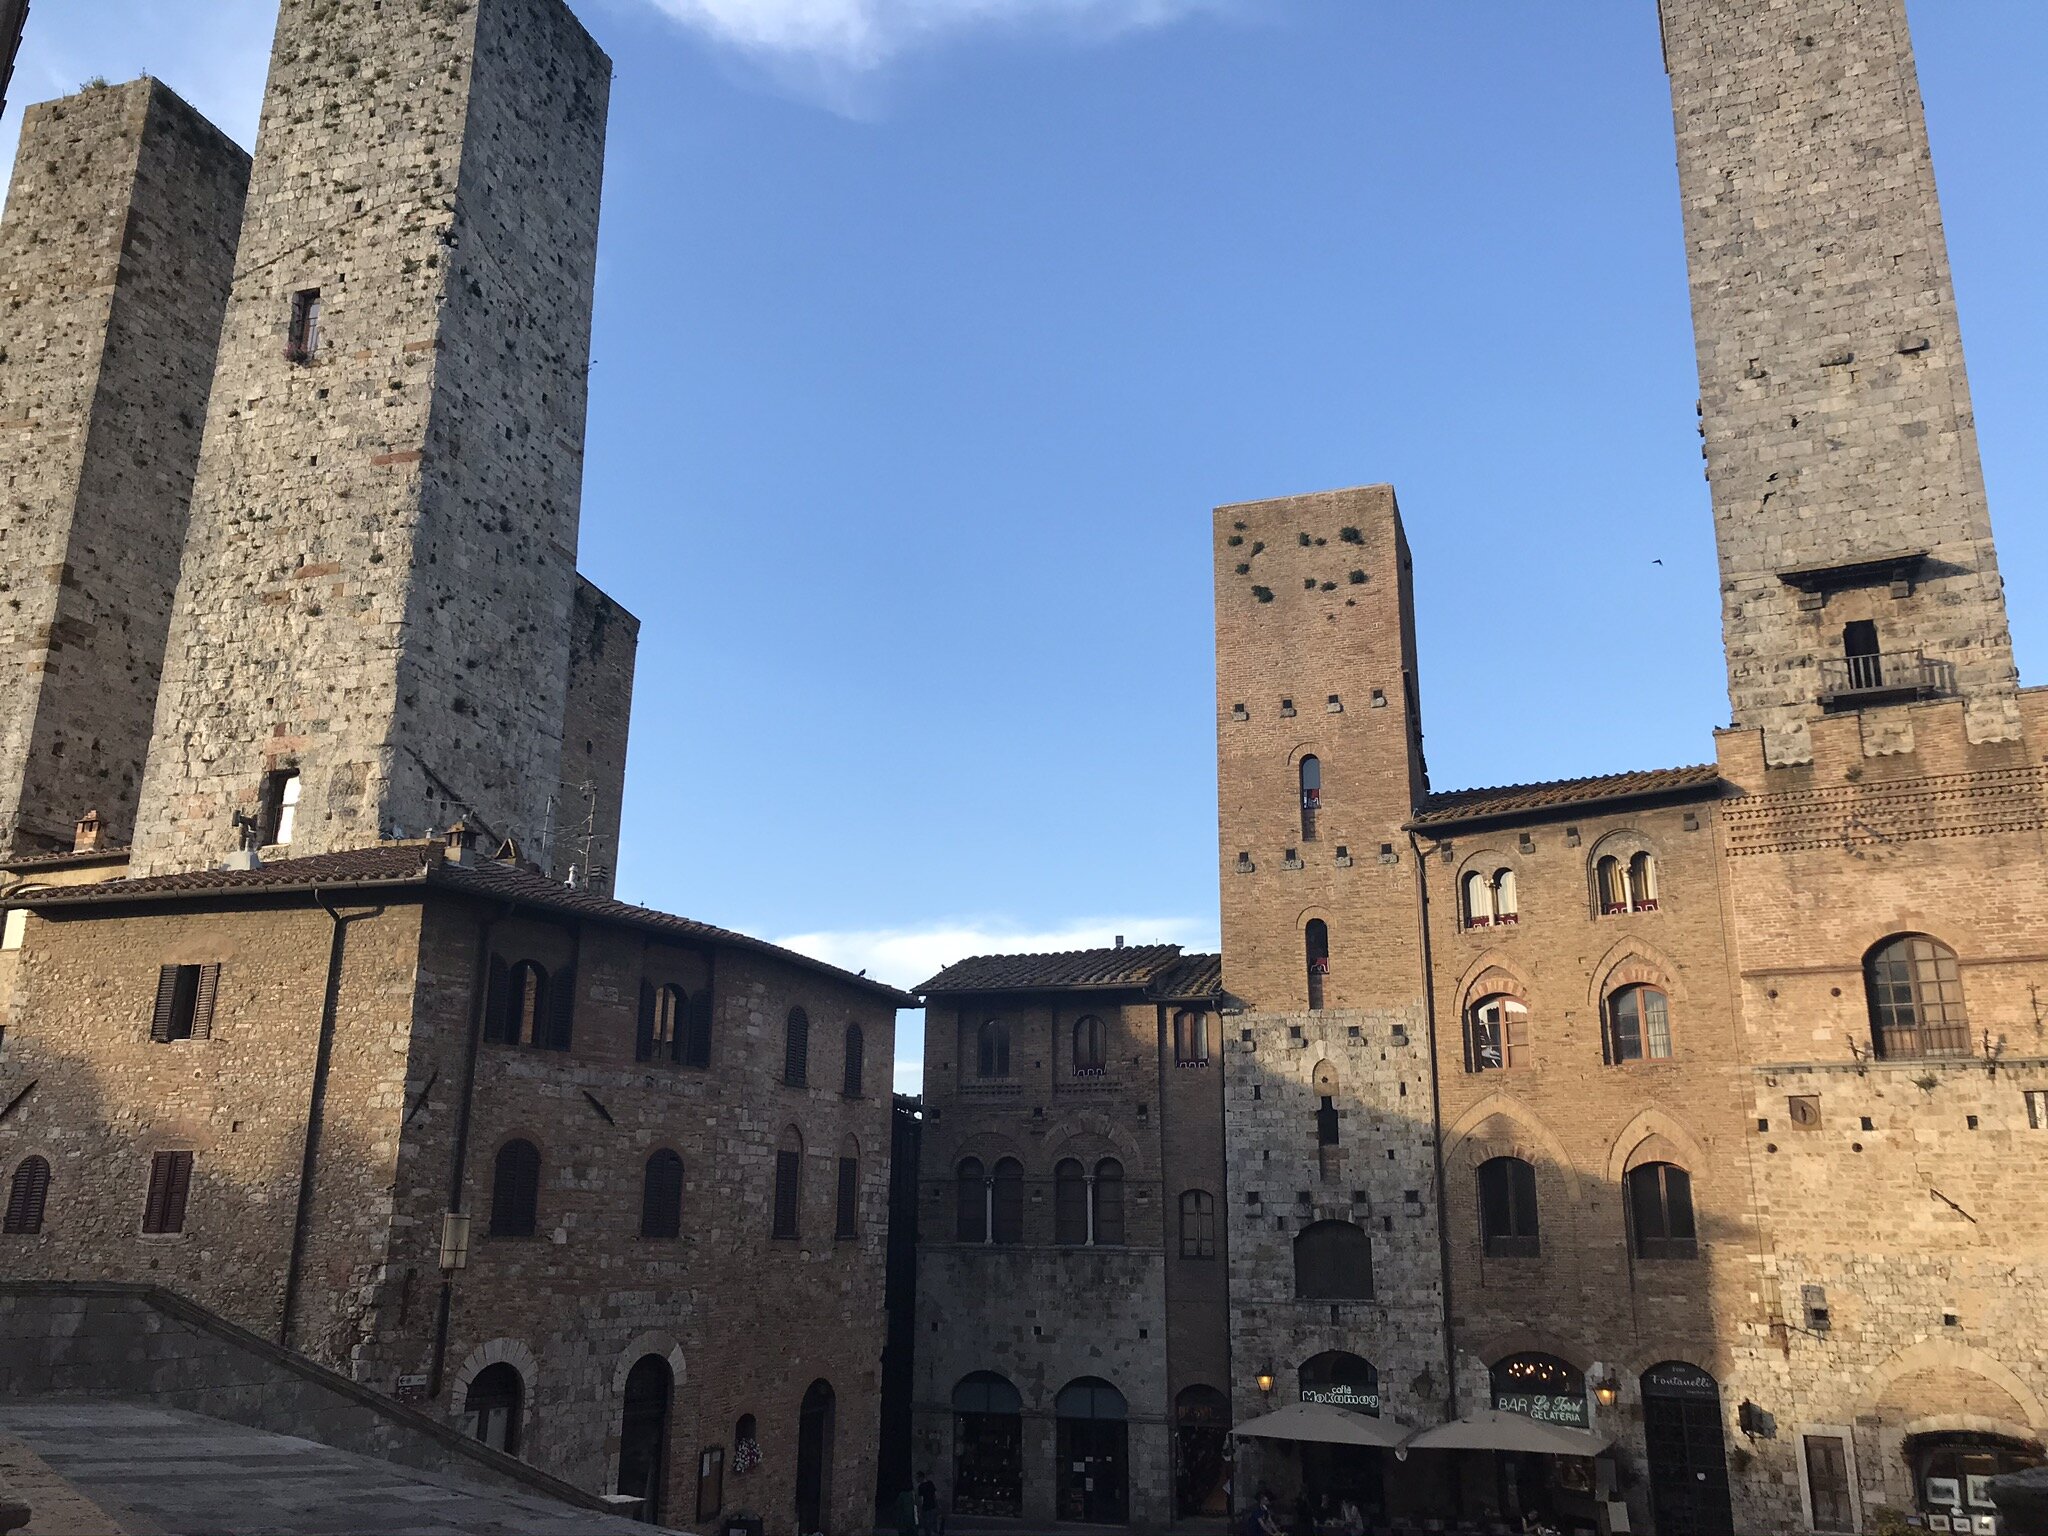 SAN GIMIGNANO, Siena, Italy. June 3rd, 2021. PICTURED: 5 of the 11 city towers, as seen from the steps of the Piazza del Duomo, line the perfectly preserved Medieval streets of San Gimignano: an absolutely stunning place to spend half a day.